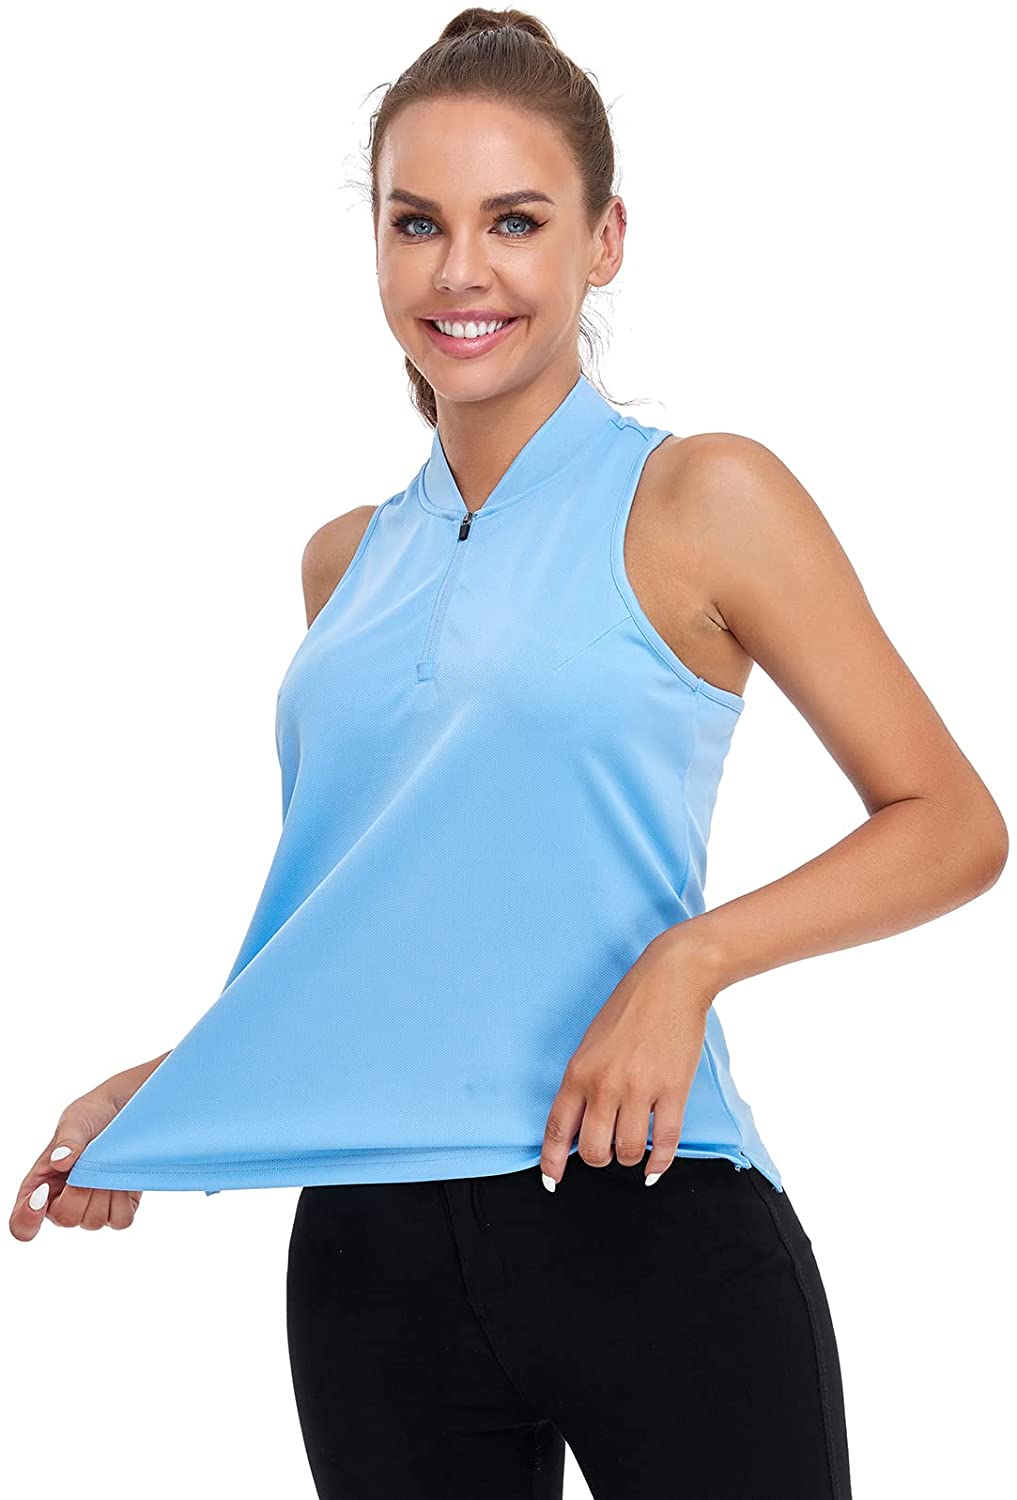 Women's Golf Polo Shirts Sleeveless Workout Tops Quick Dry Loose Fit Athletic Tennis Running Racerback Tank Top